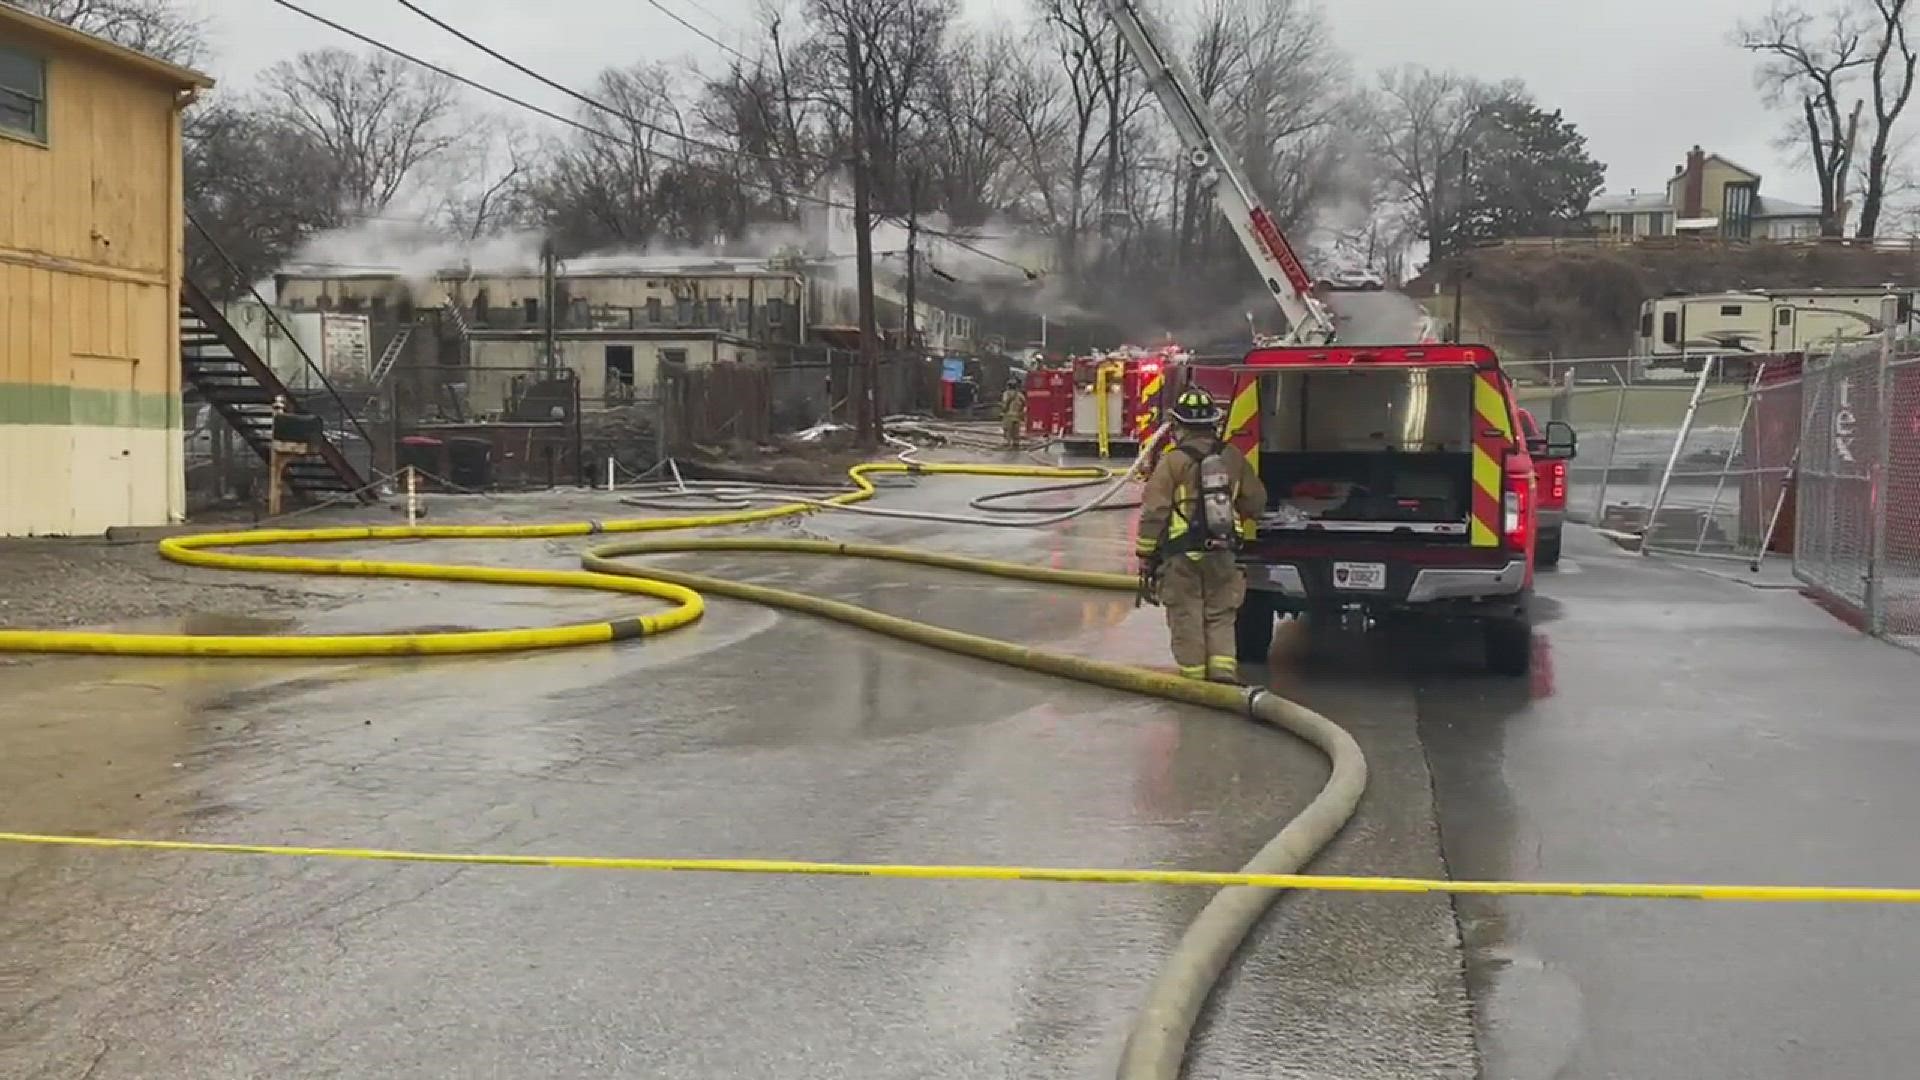 The fire occurred in the Clifton neighborhood at the intersection of Mellwood Avenue and Stevenson Avenue.